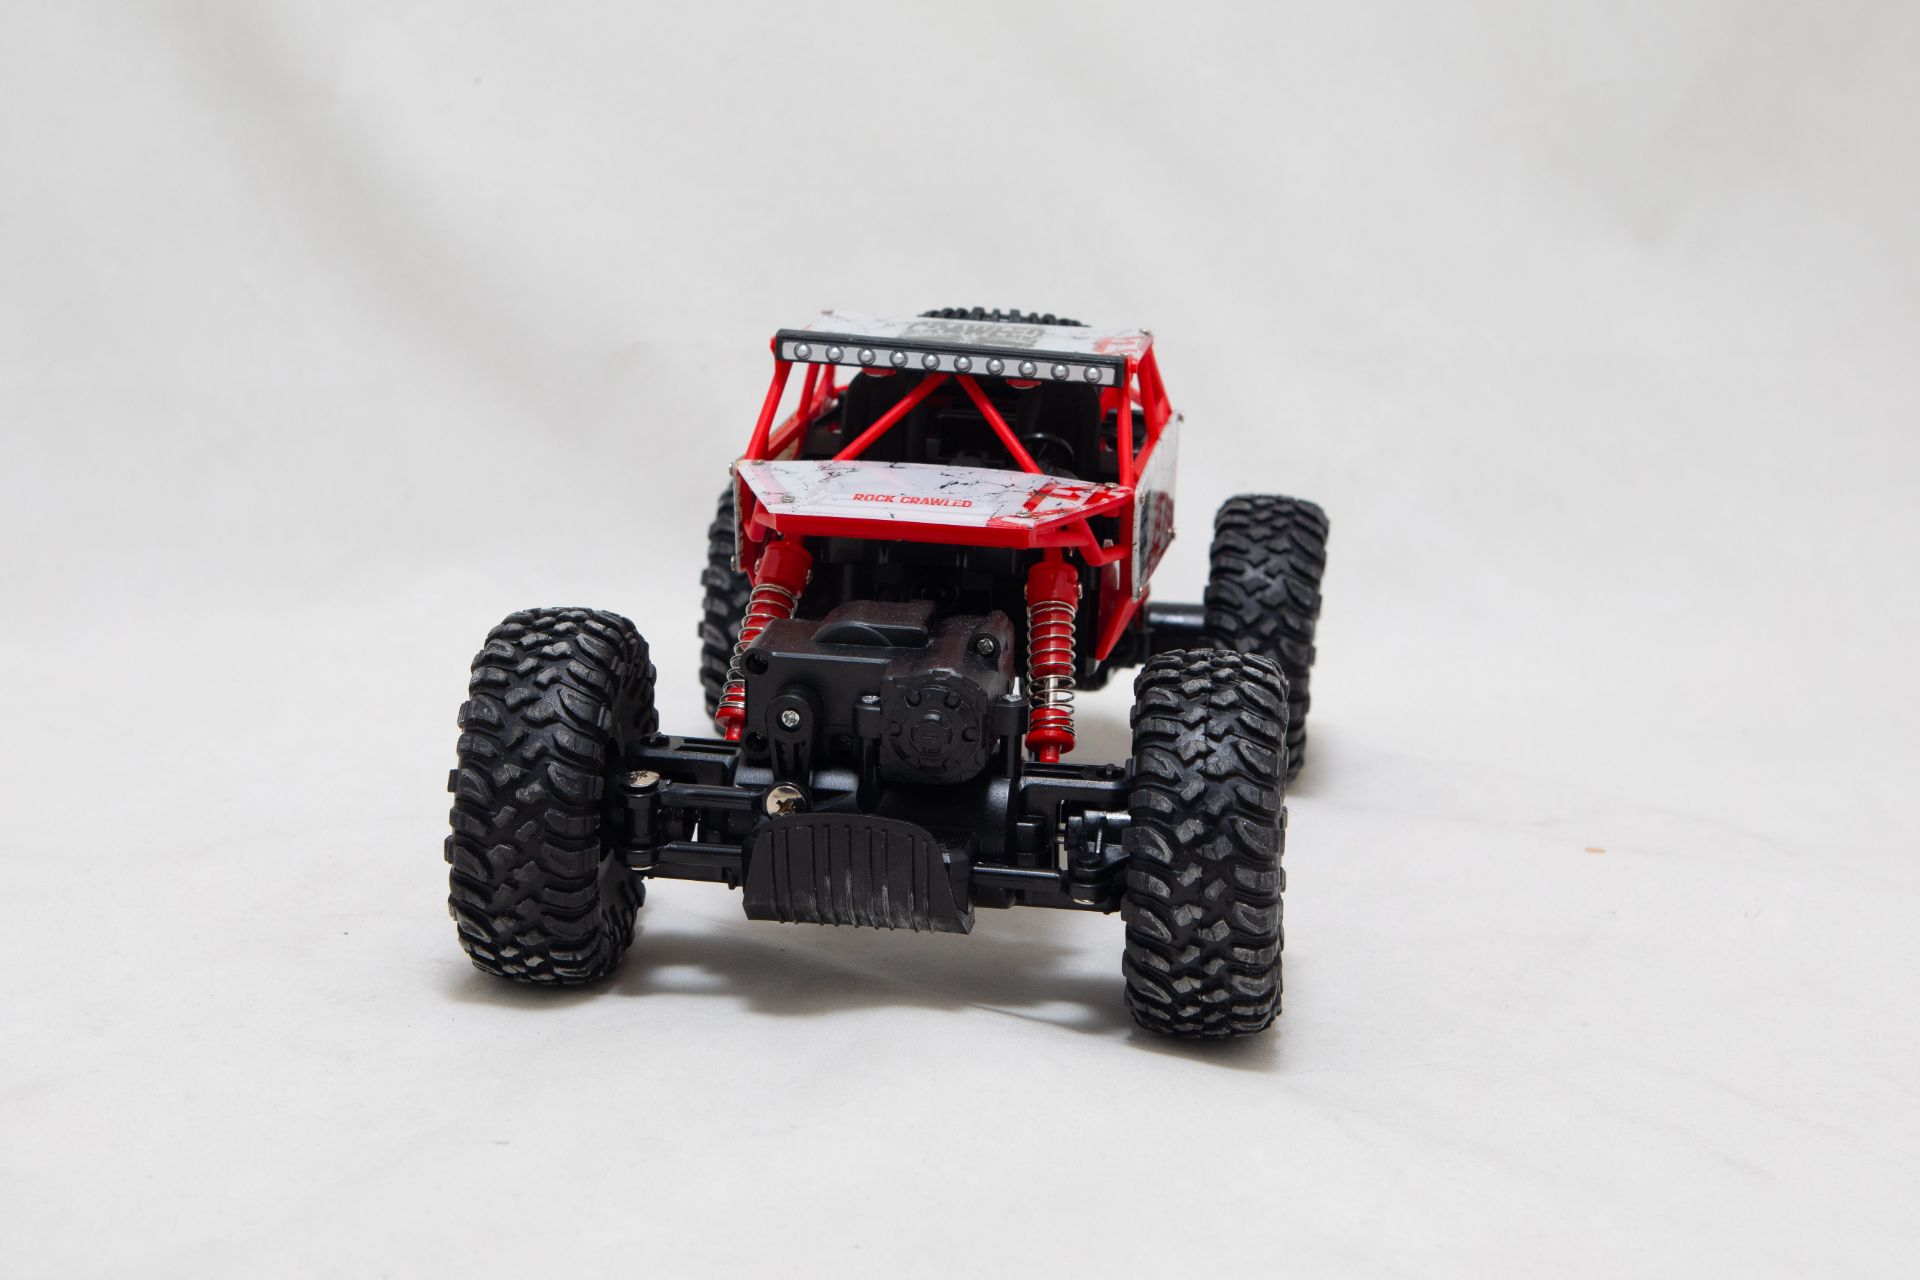 18 X ROCK CRAWLER - REMOTE CONTROL OFF ROAD TRUCK - Image 6 of 9